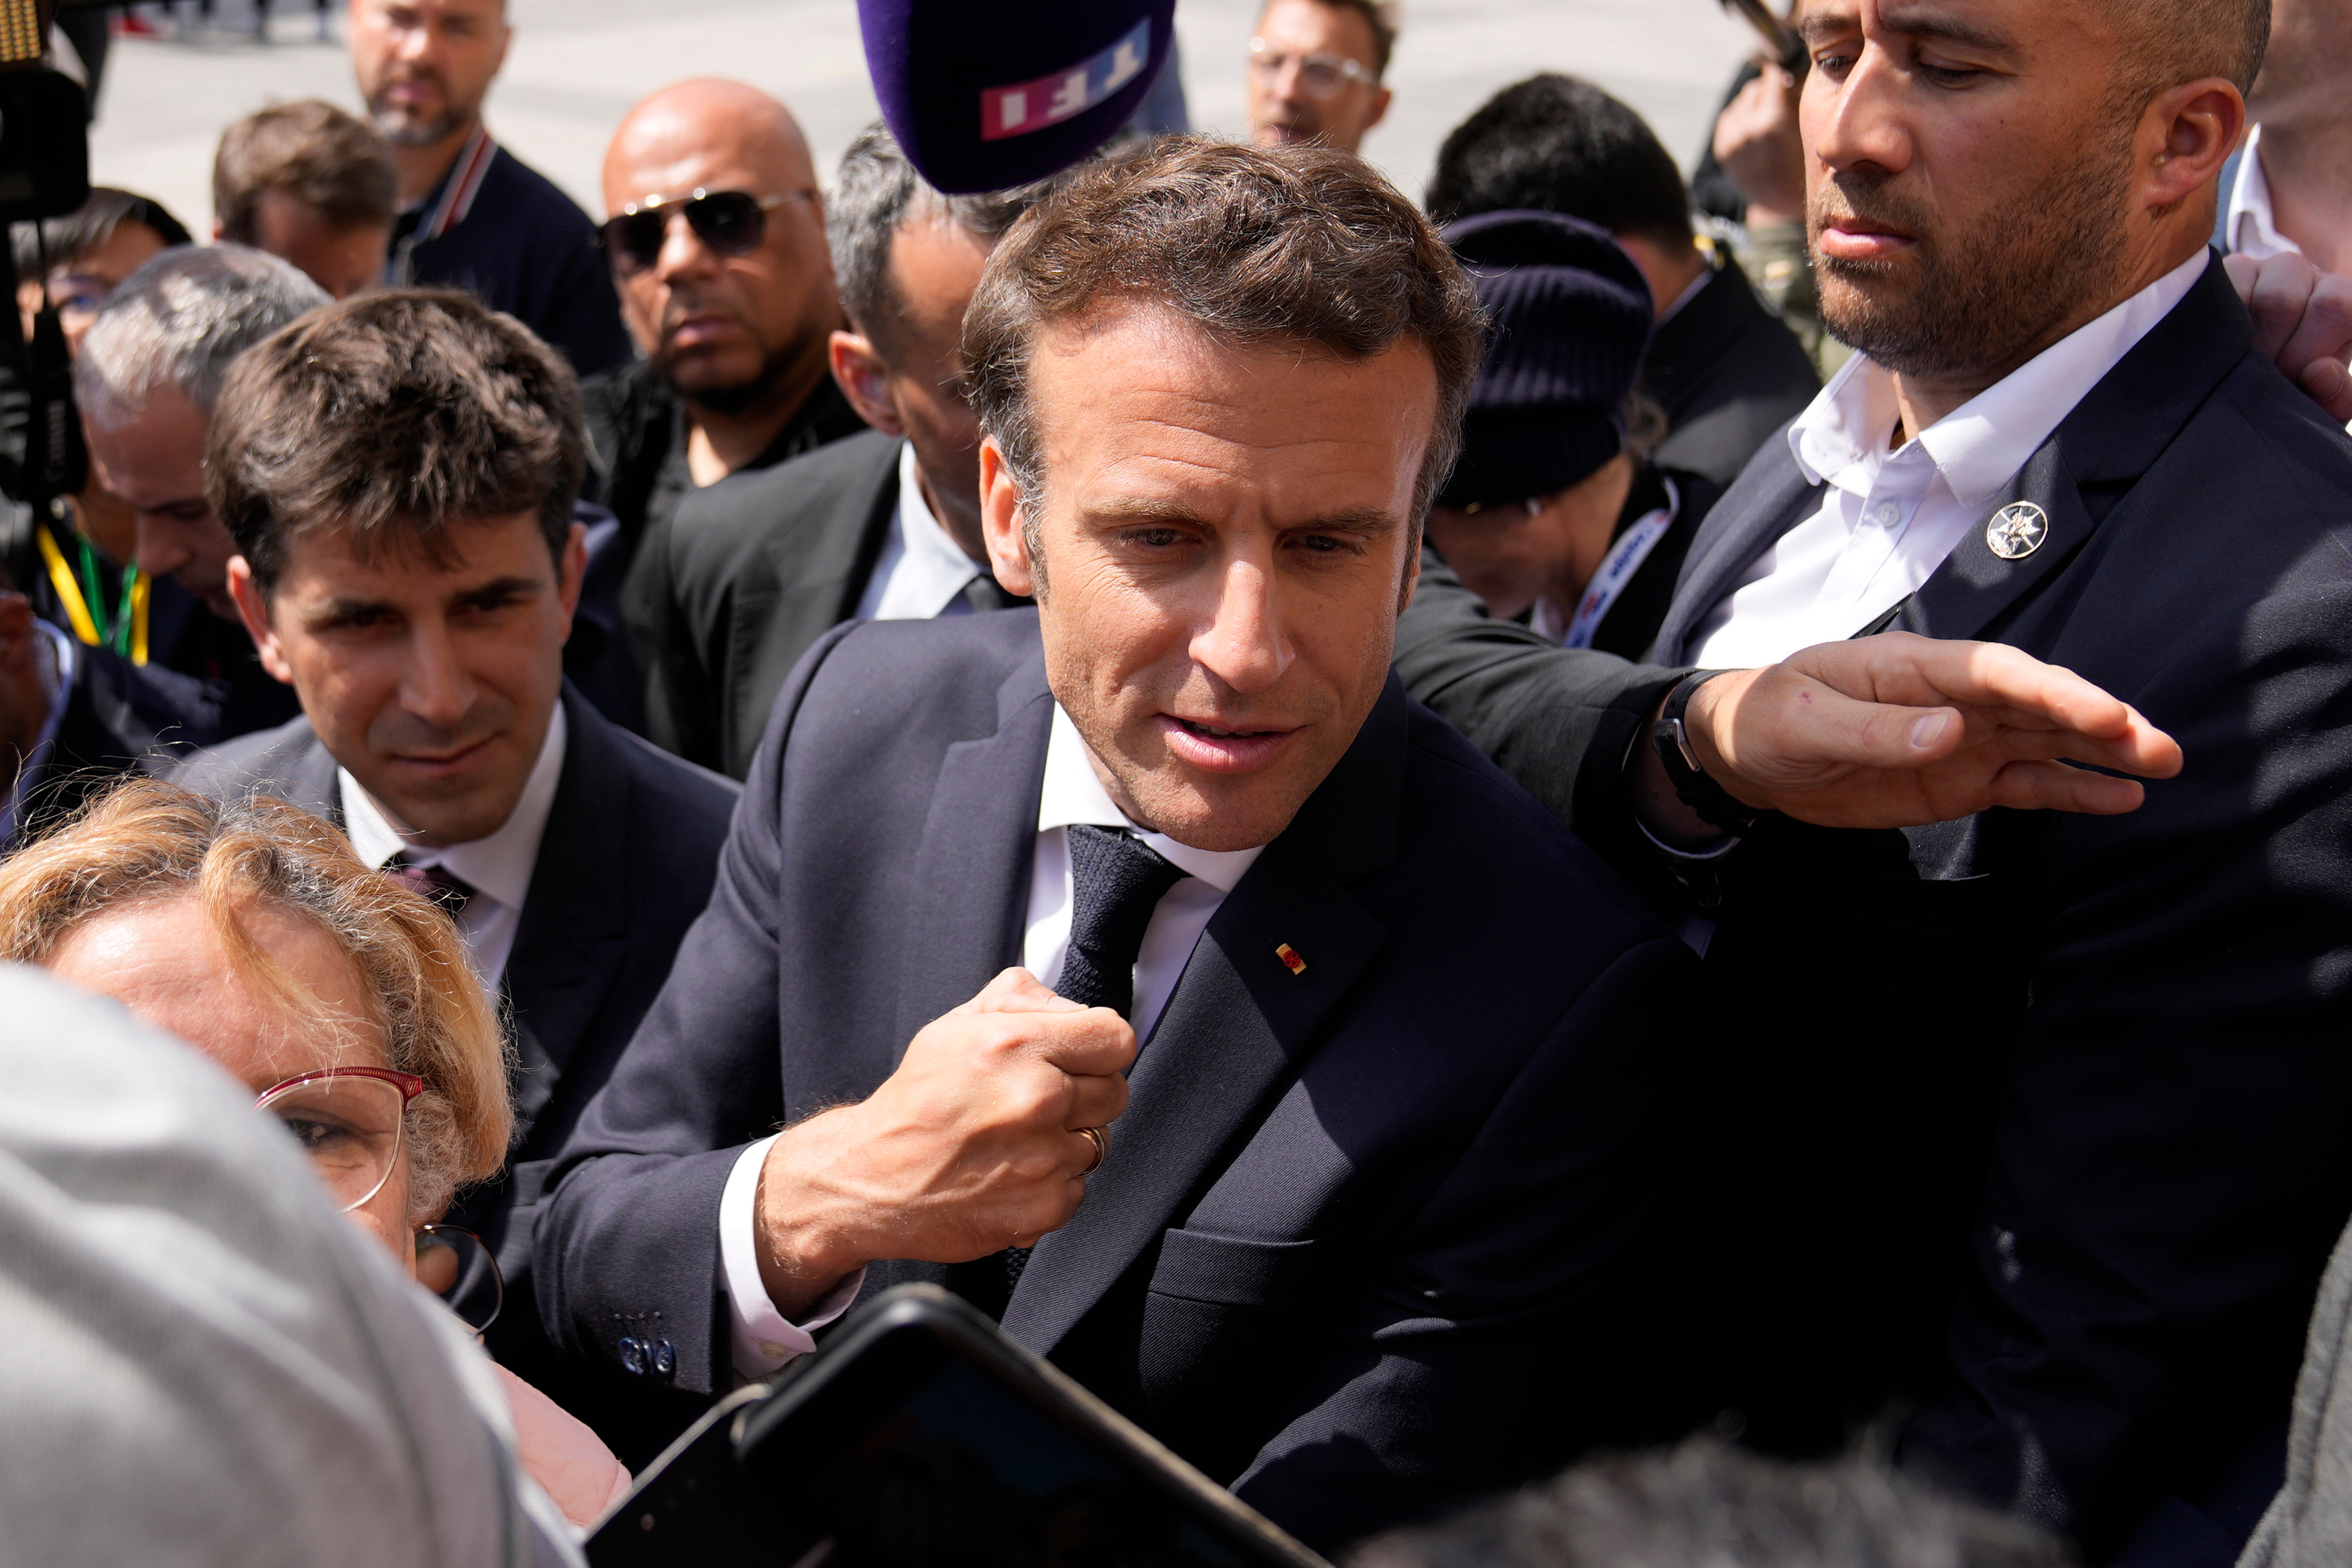 French president Emmanuel Macron meets residents during a campaign stop in Saint-Denis, outside Paris, on Thursday